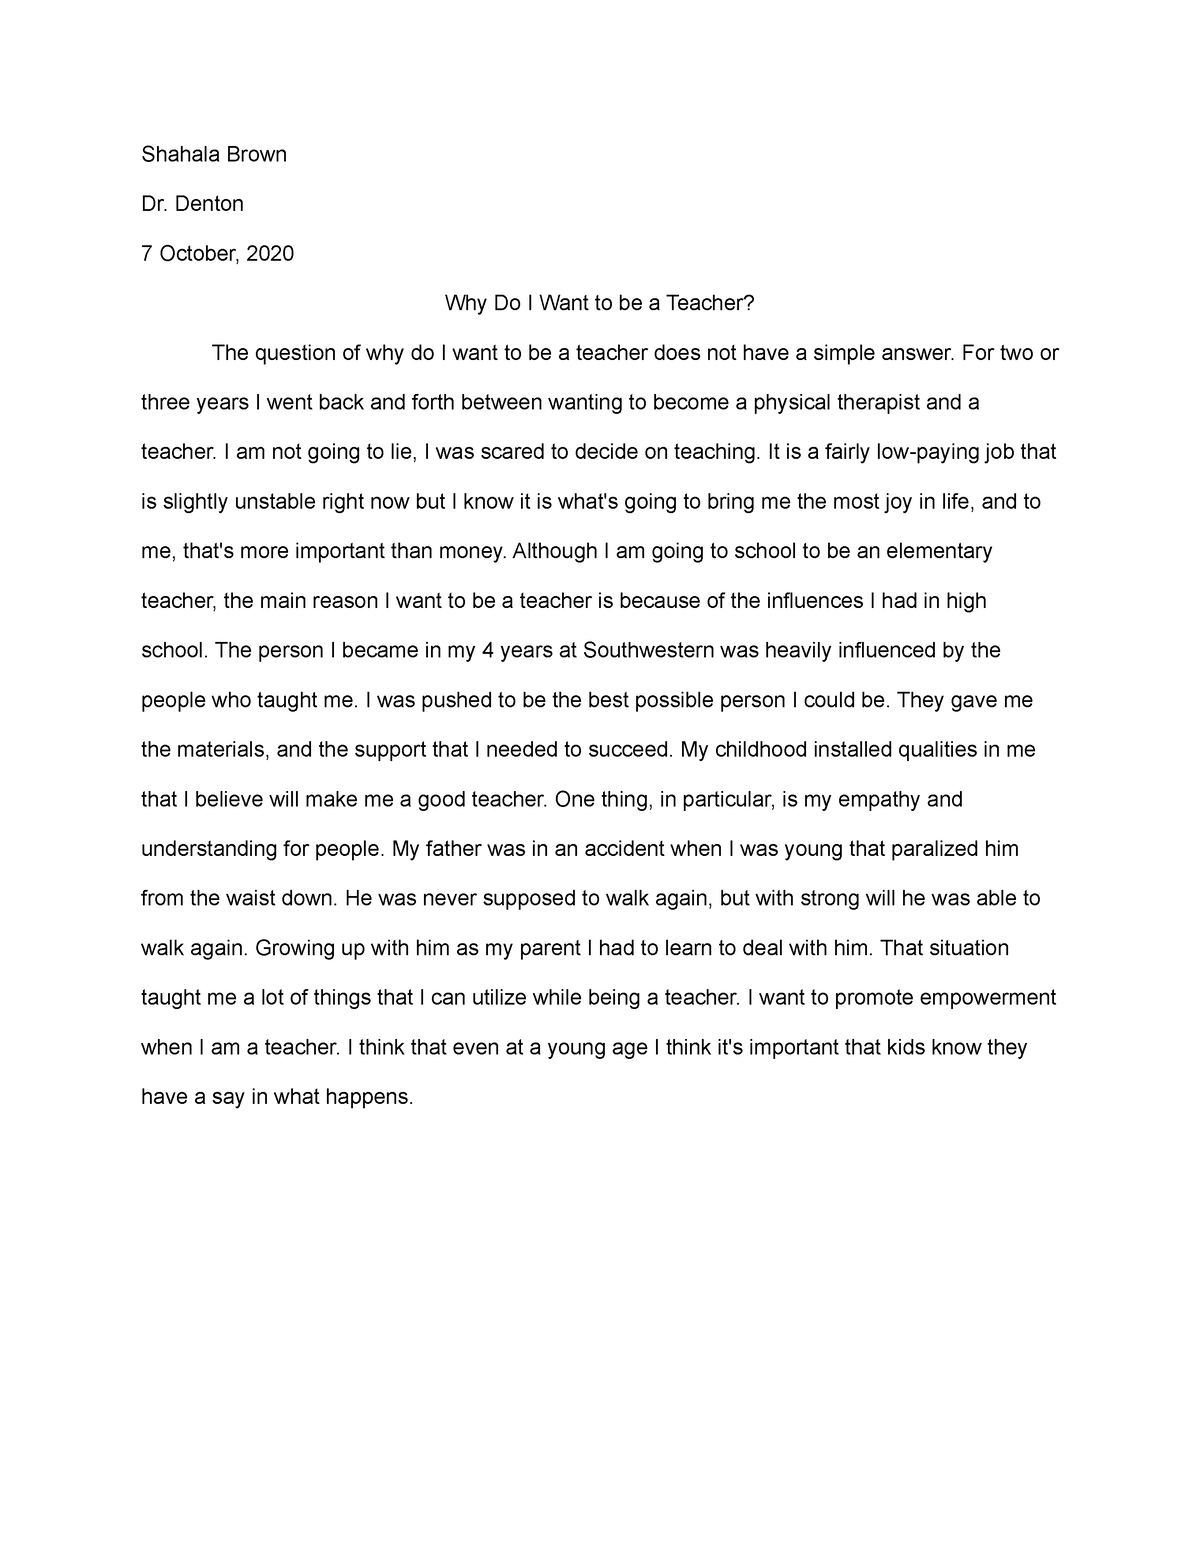 why want to be a teacher essay